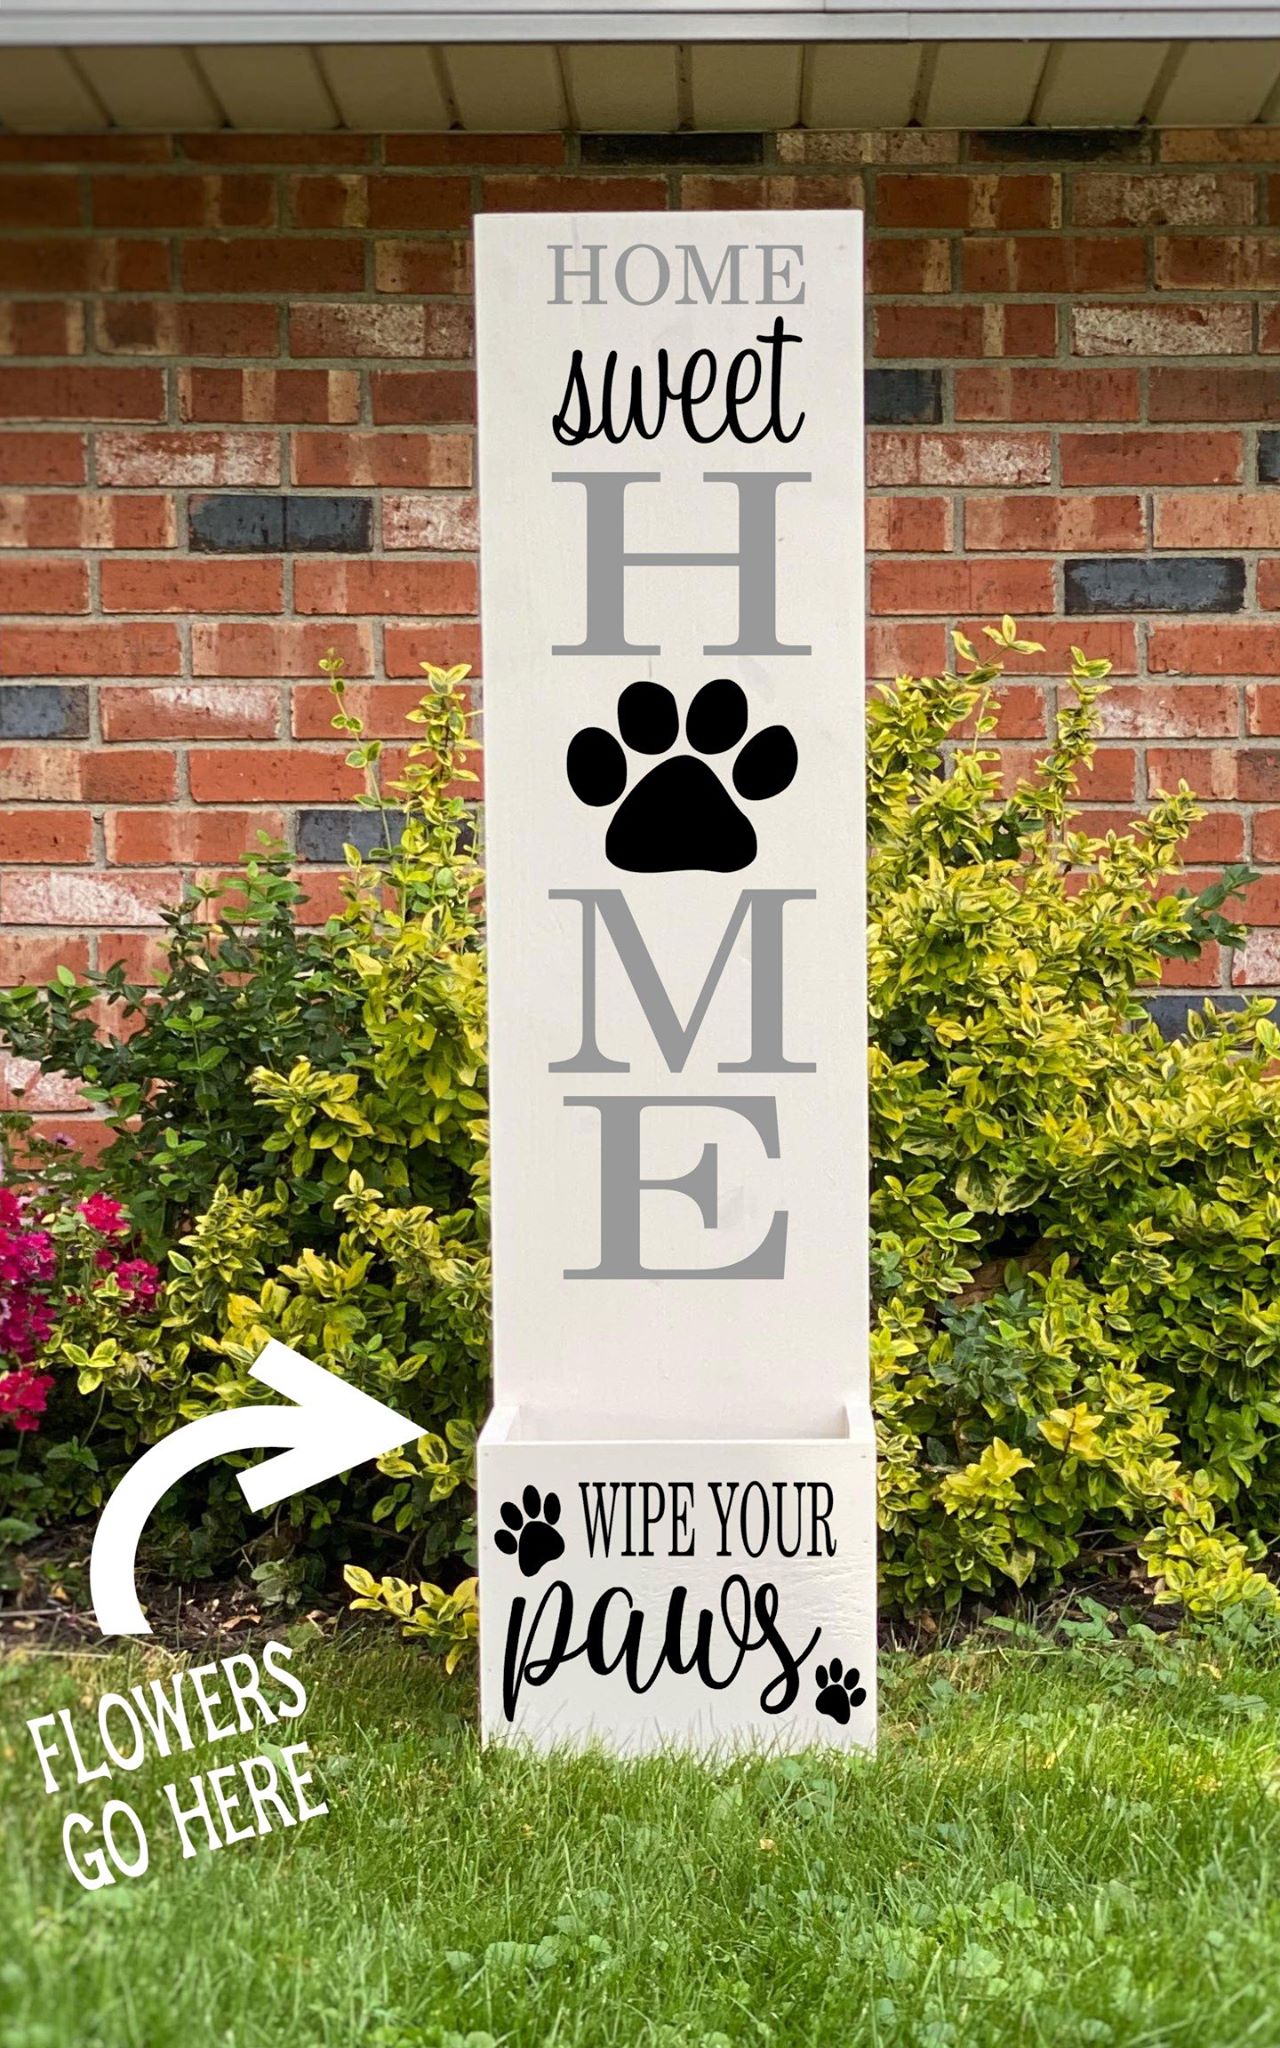 Porch Planter - Home sweet Home - Wipe your paws